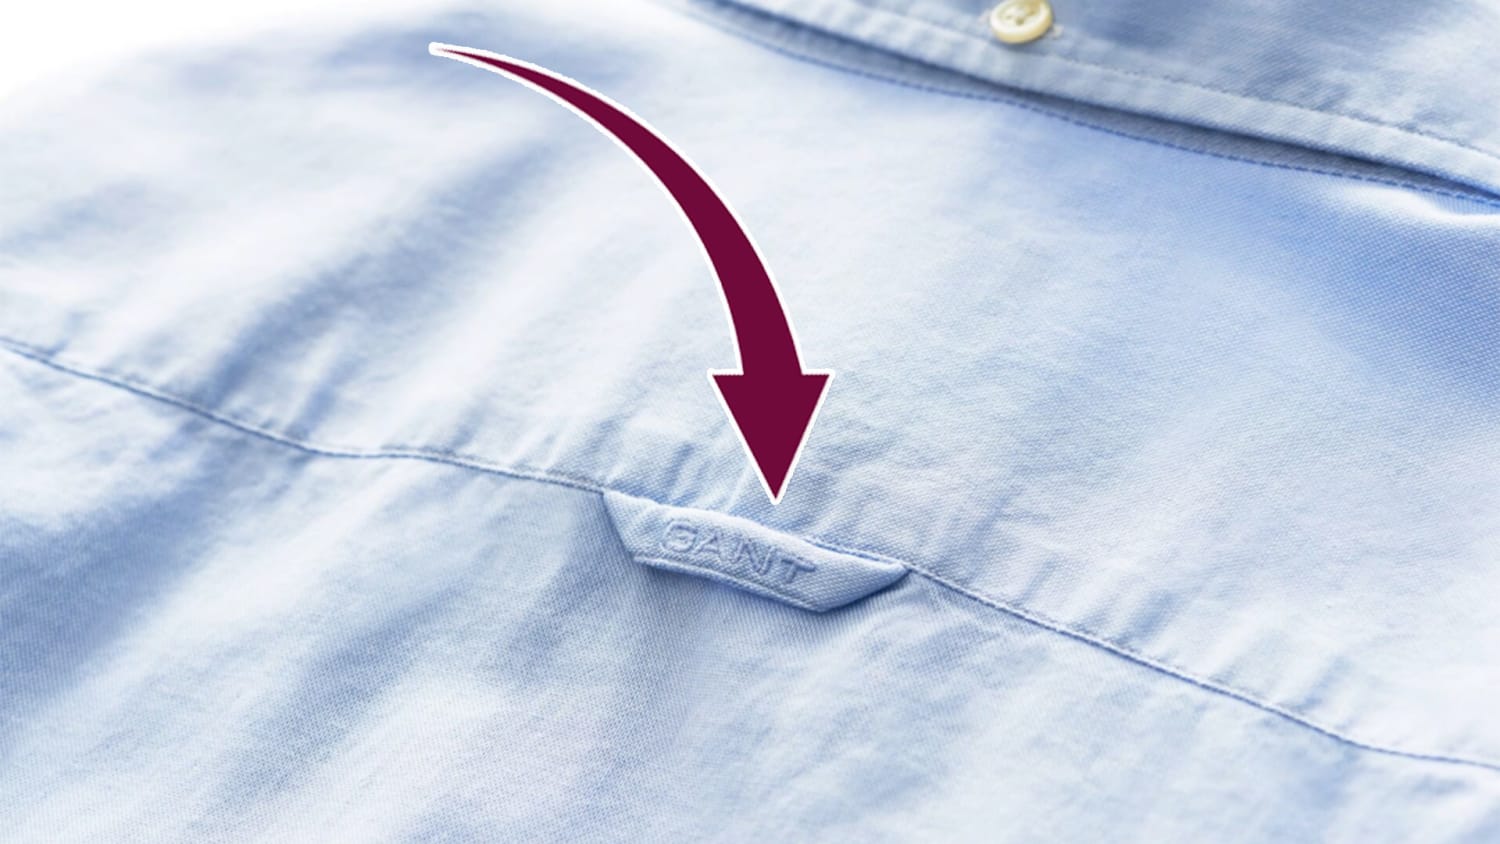 Why do button-down shirts have a loop on the back?